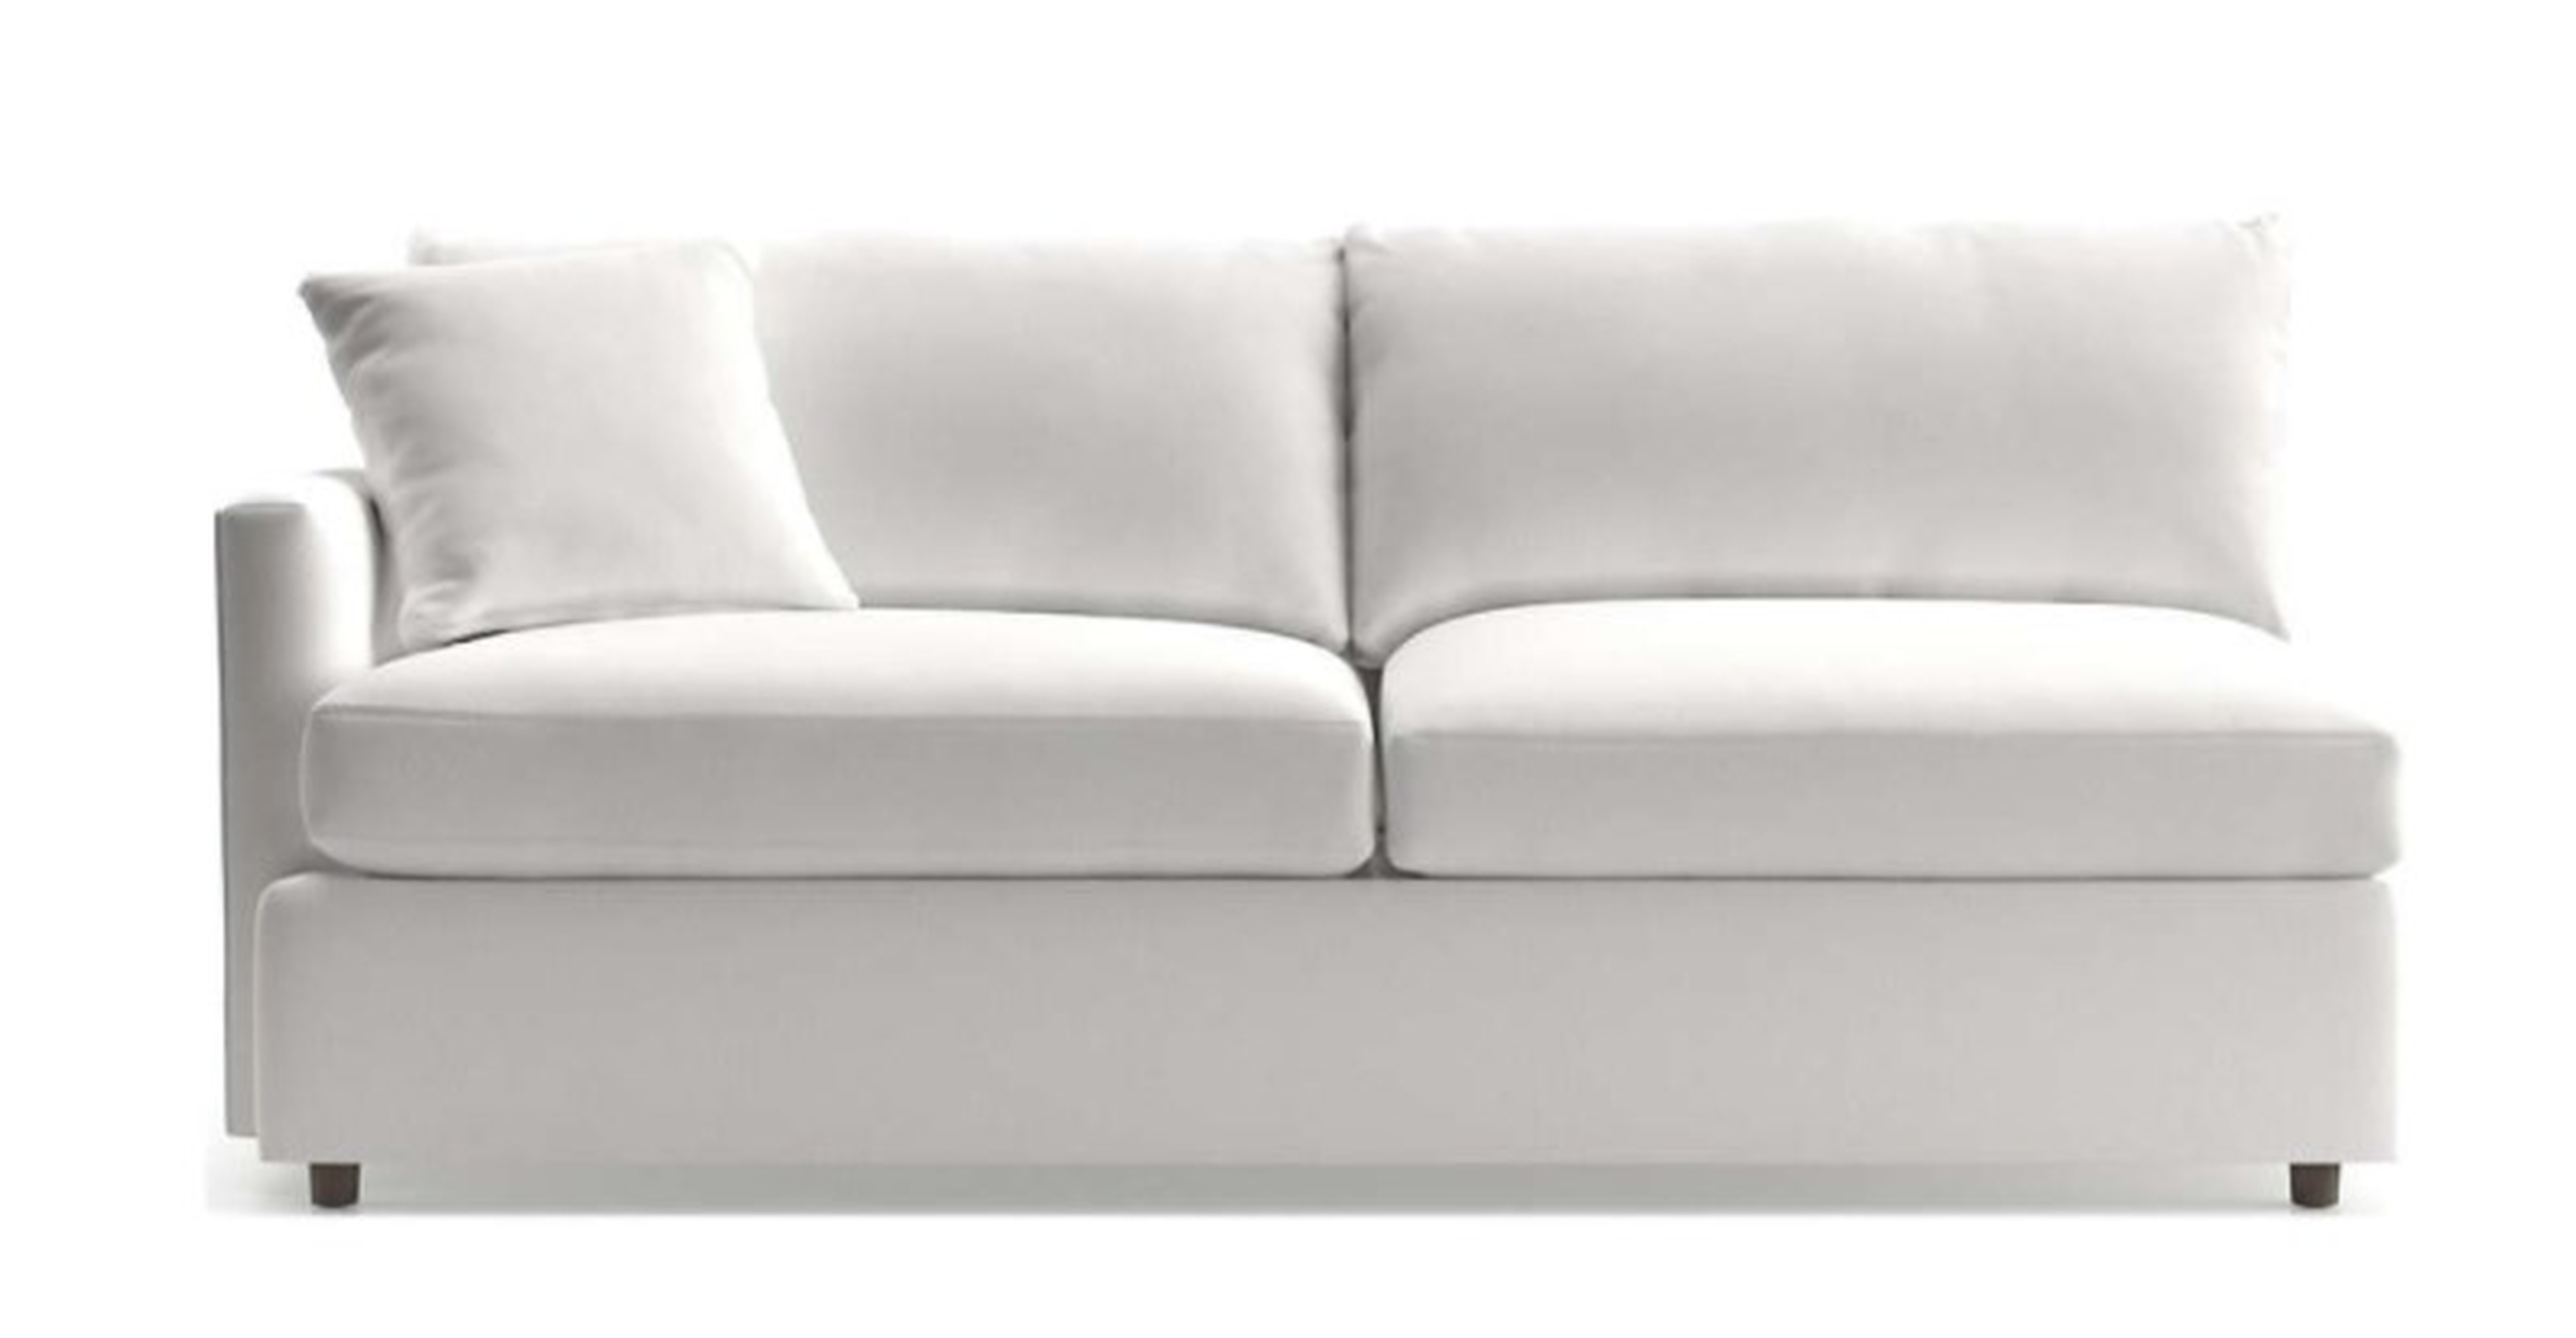 Lounge II Petite Left Arm Sofa- View White - Crate and Barrel